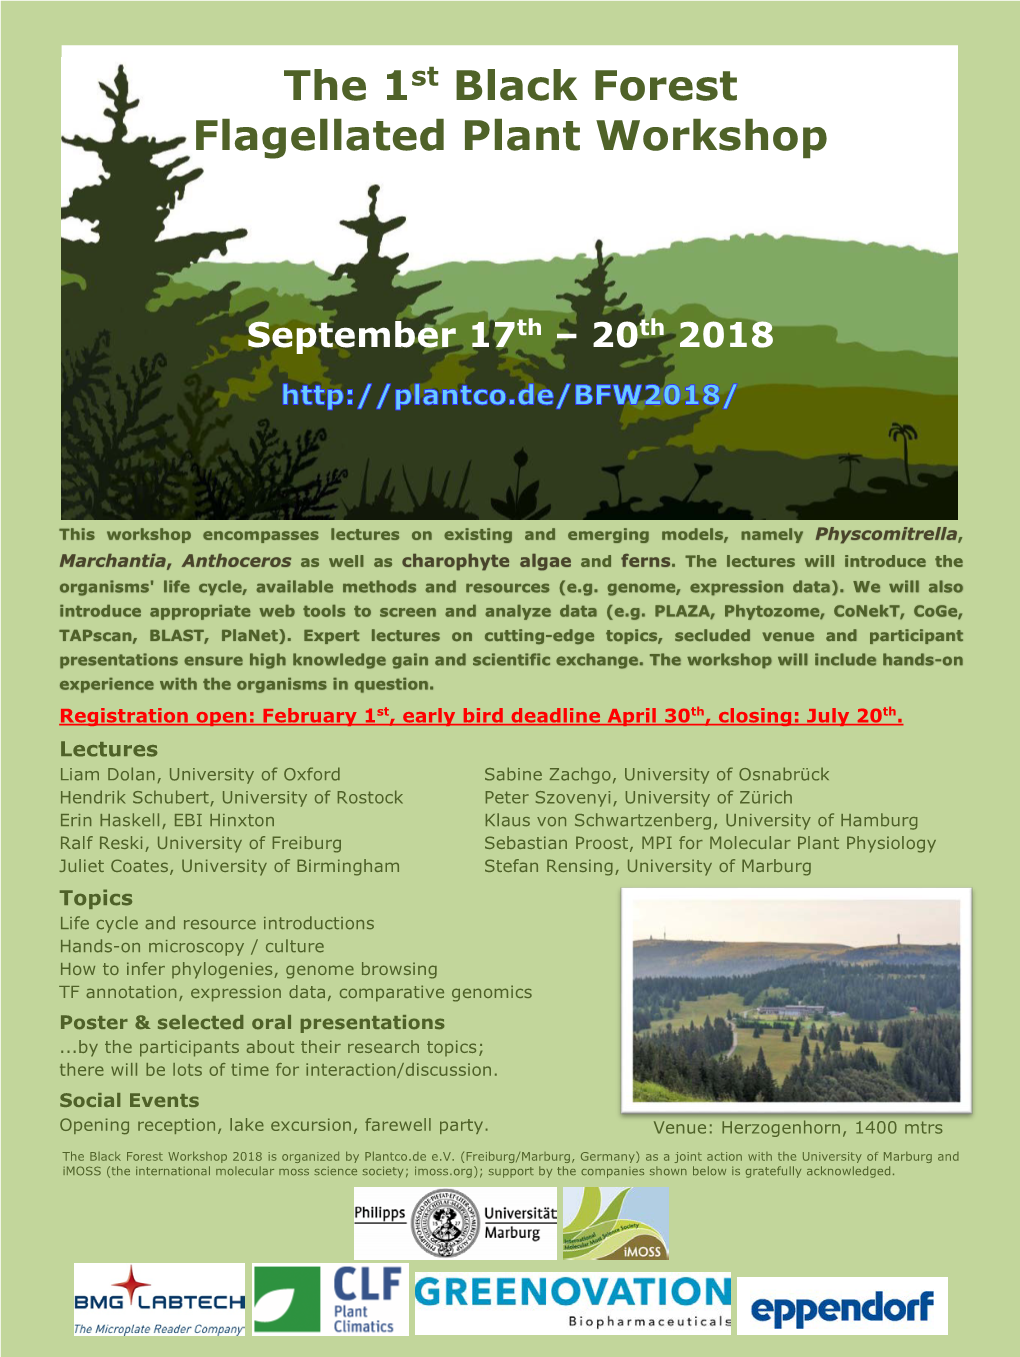 The 1St Black Forest Flagellated Plant Workshop